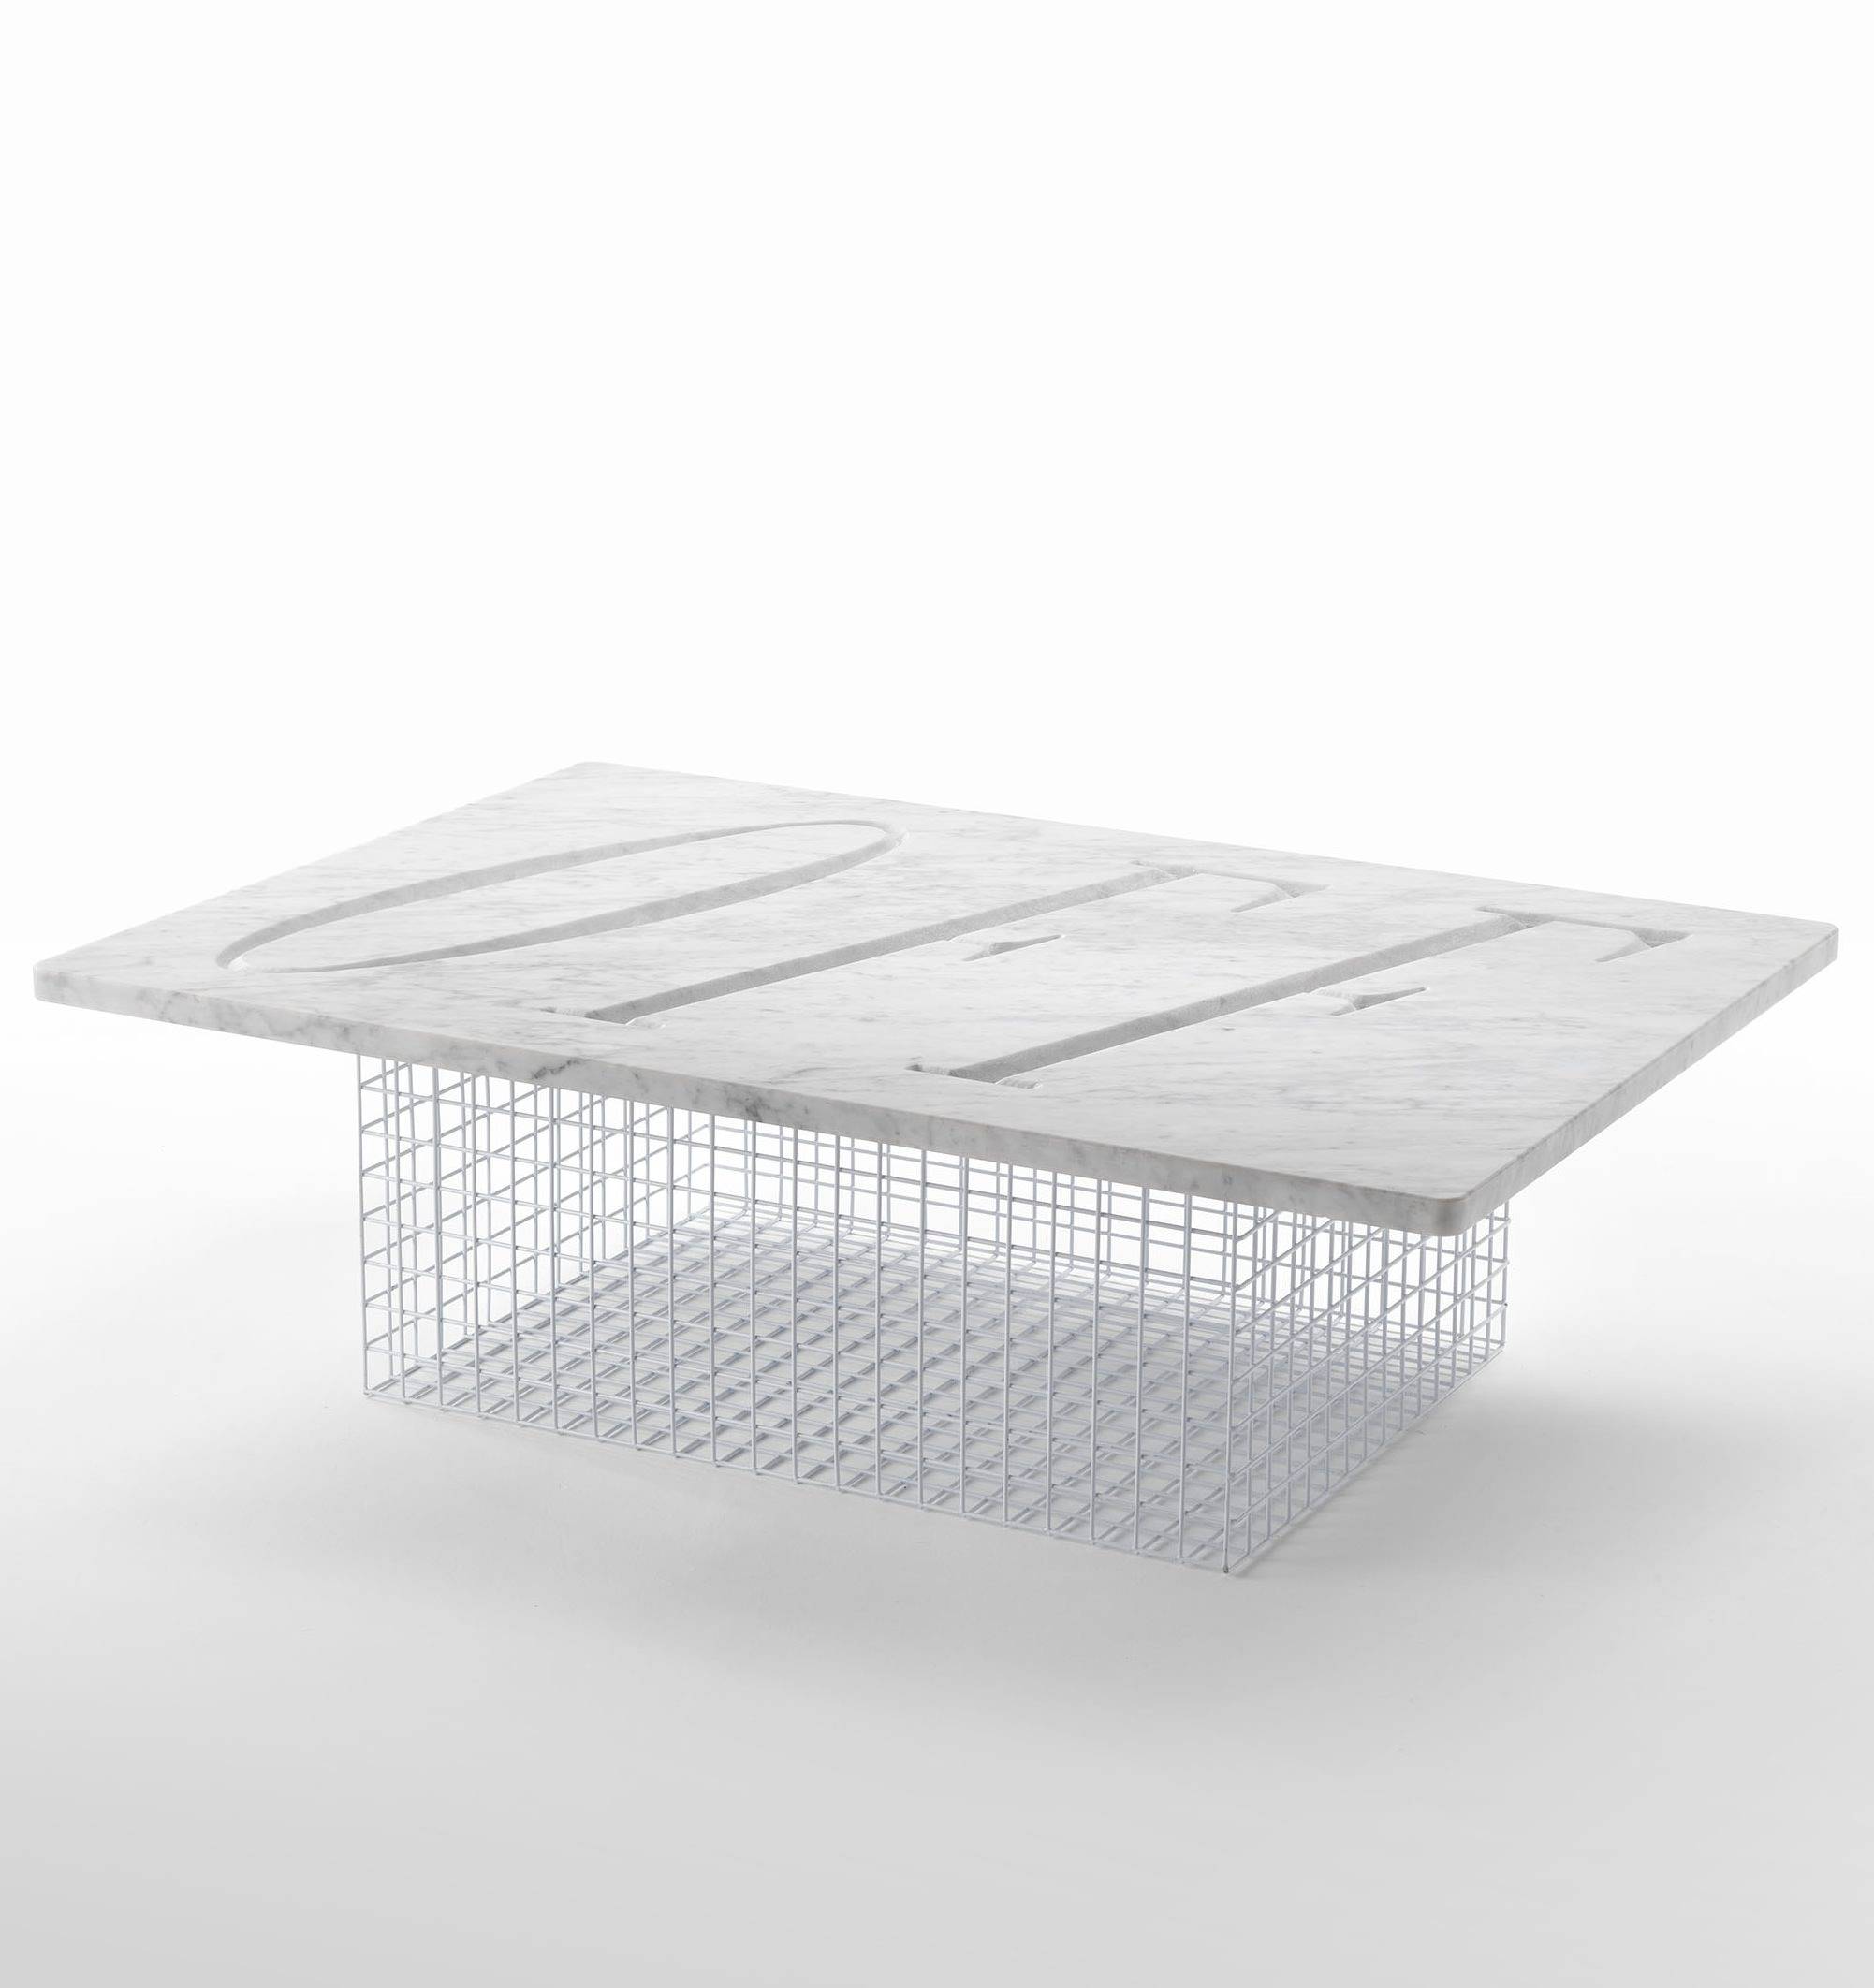 Marble table and wire mesh structure from Virgil Abloh's first design collection